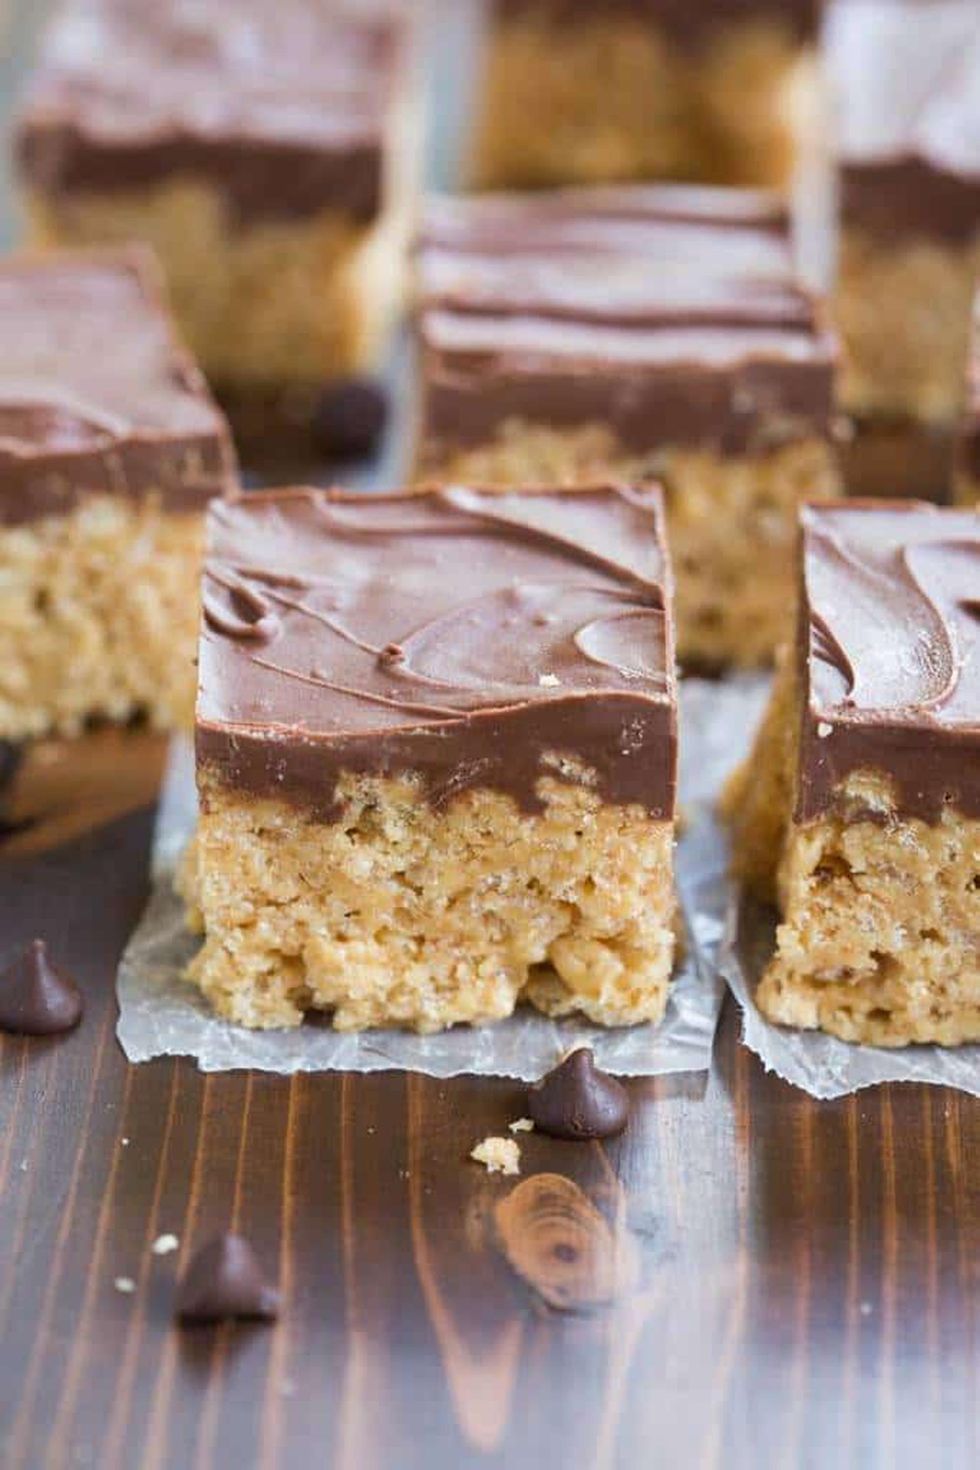 25 No-bake recipes that will make you look like a pro chef